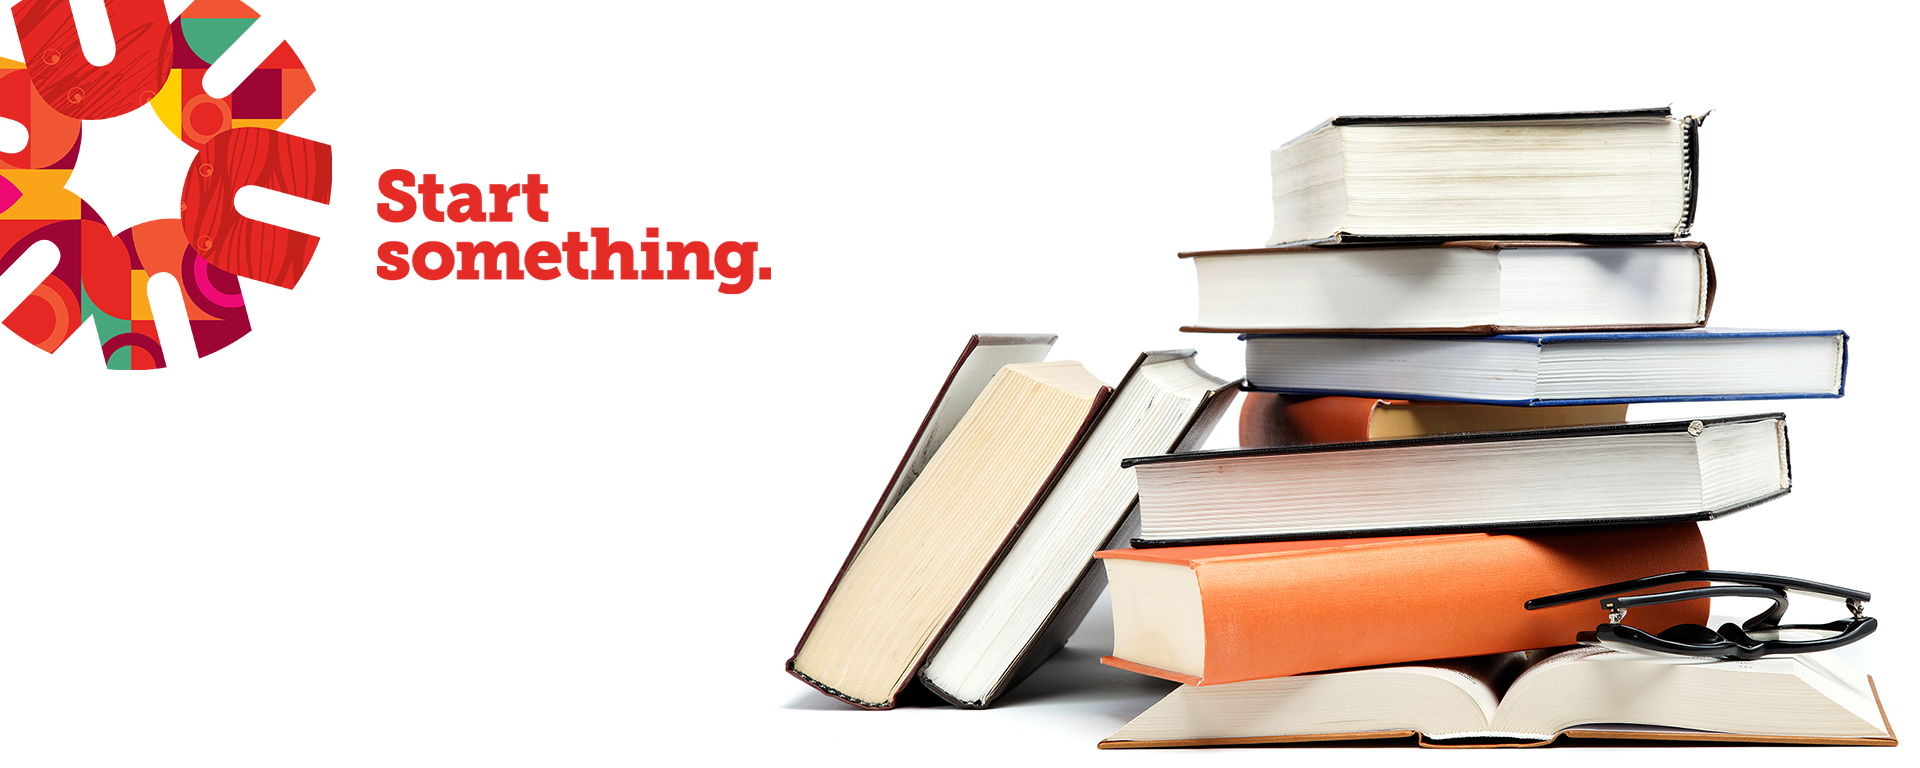 Graphic featuring the colourful Arts spark with the words "Start something" and a large graphic showing a stack of books with a pair of glasses balanced on them.